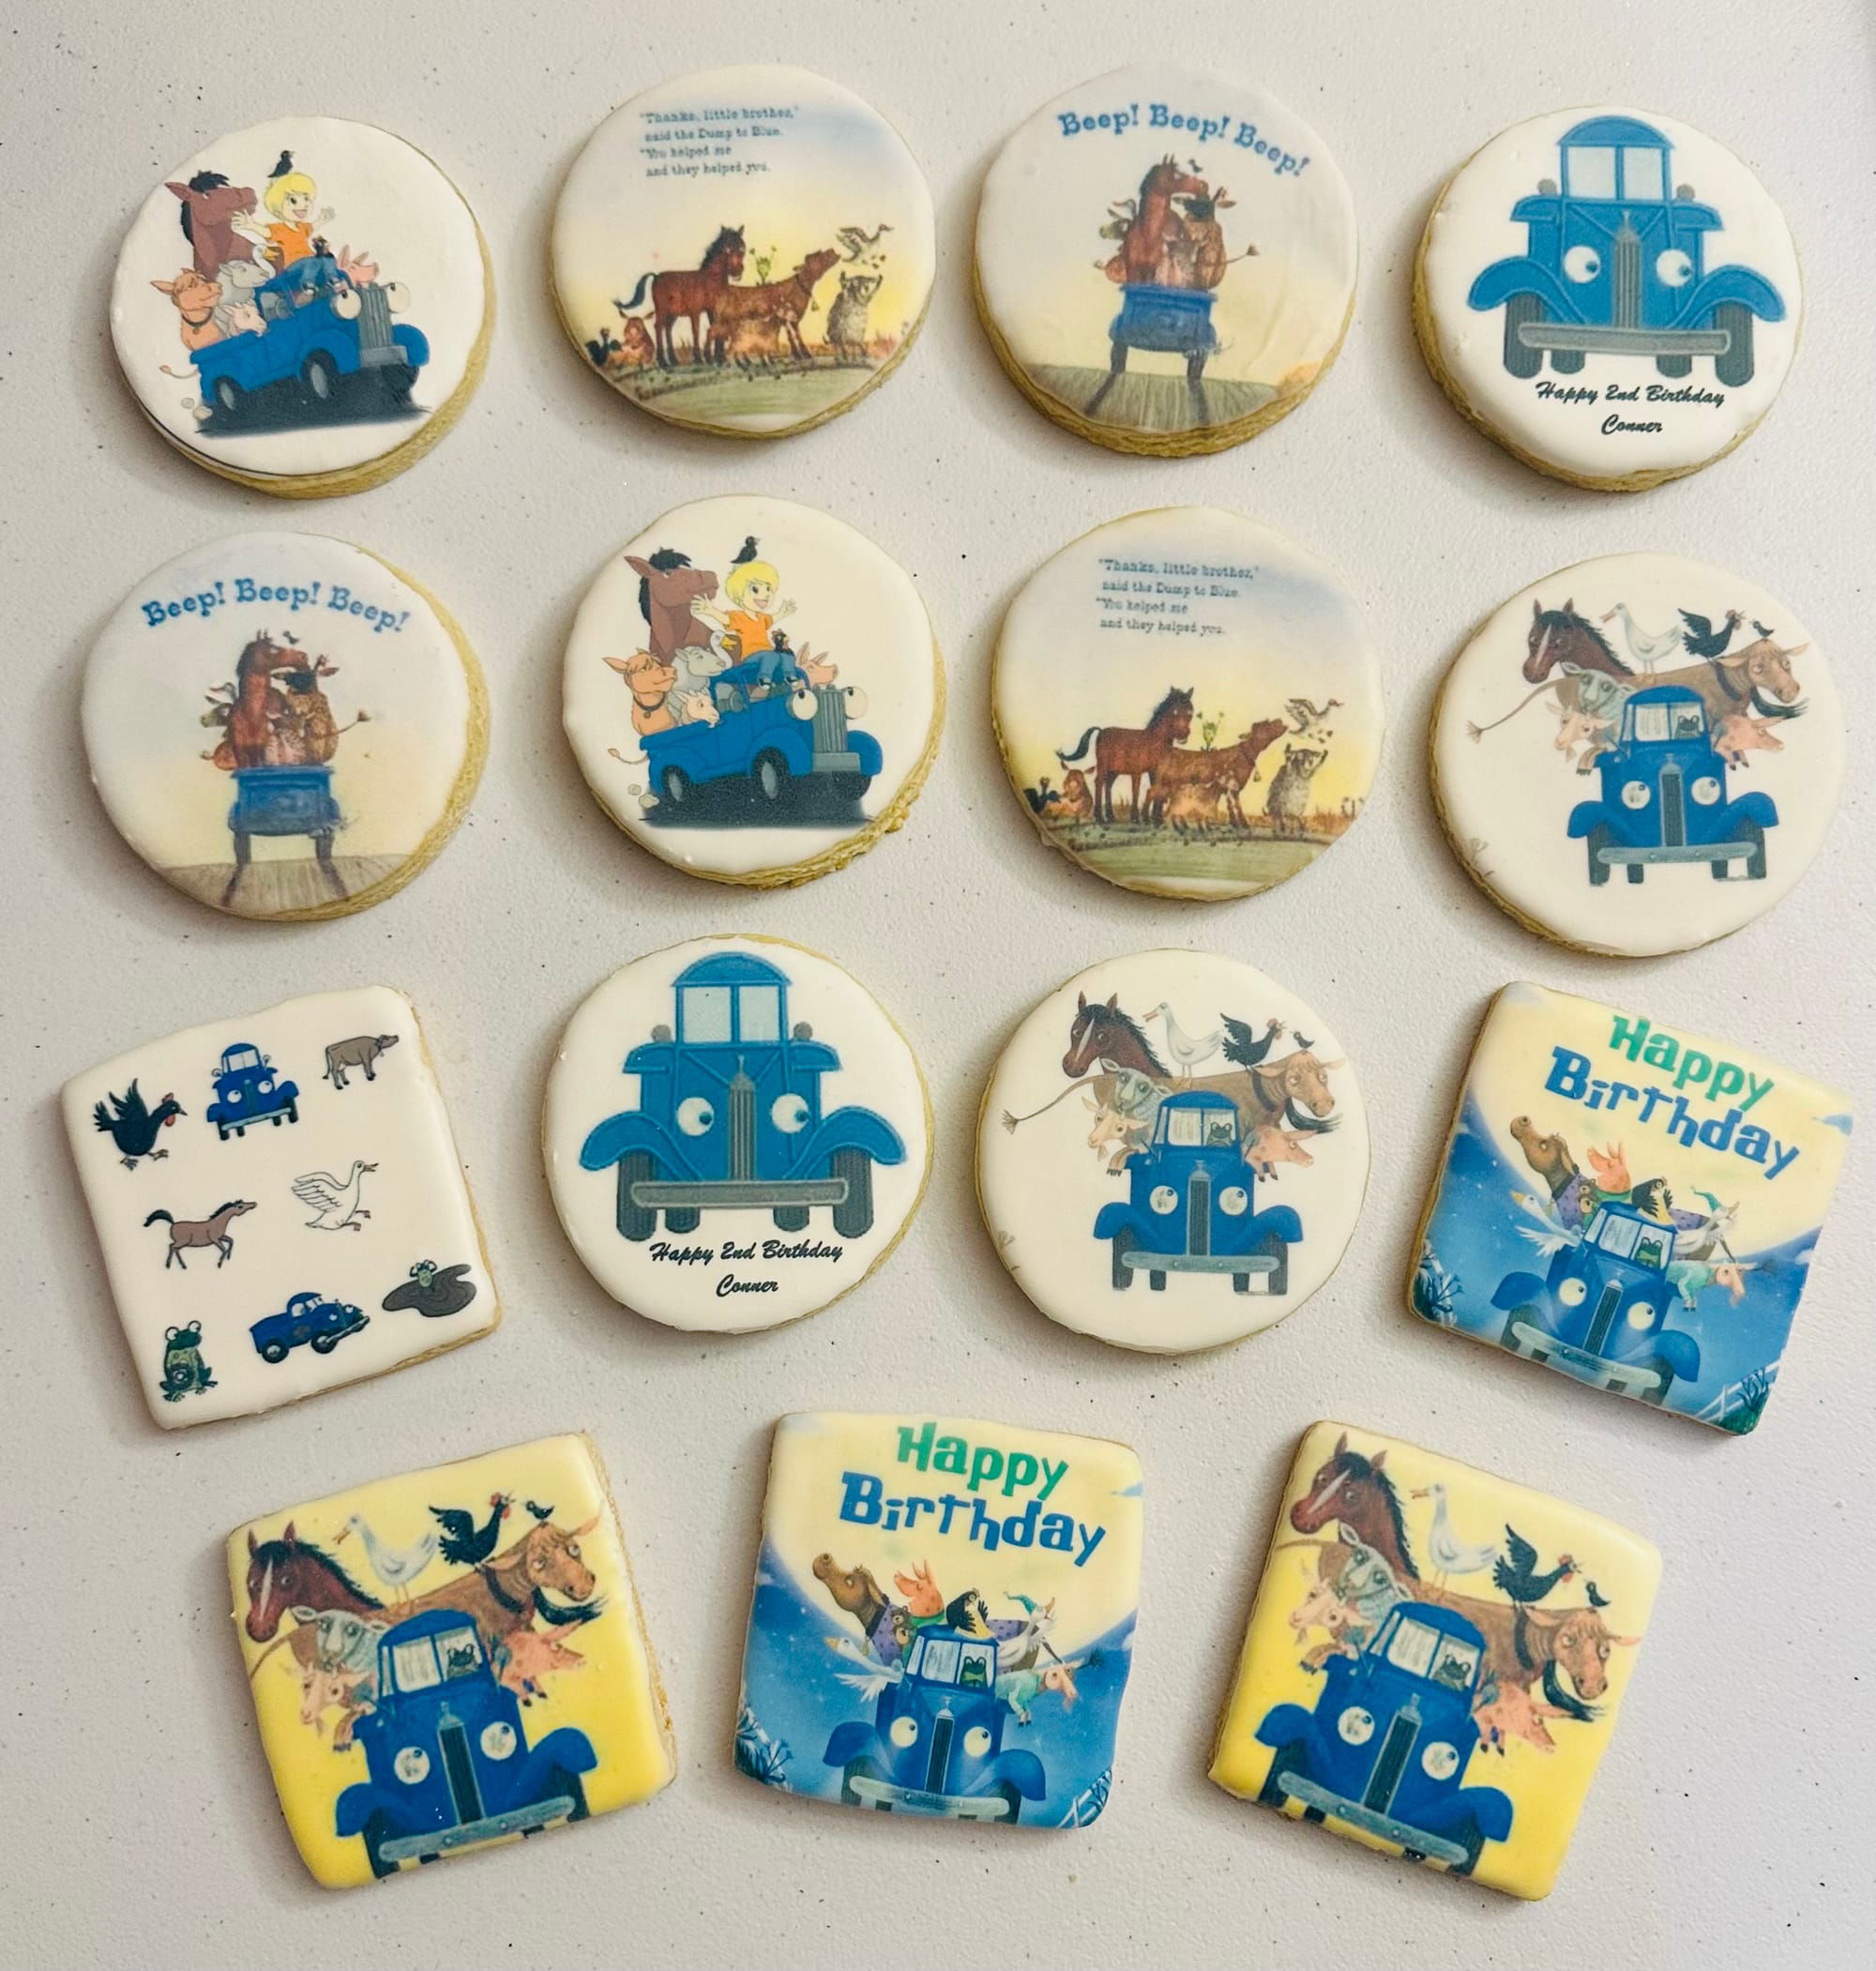 The Little Blue Truck Sugar Cookies with Royal Icing